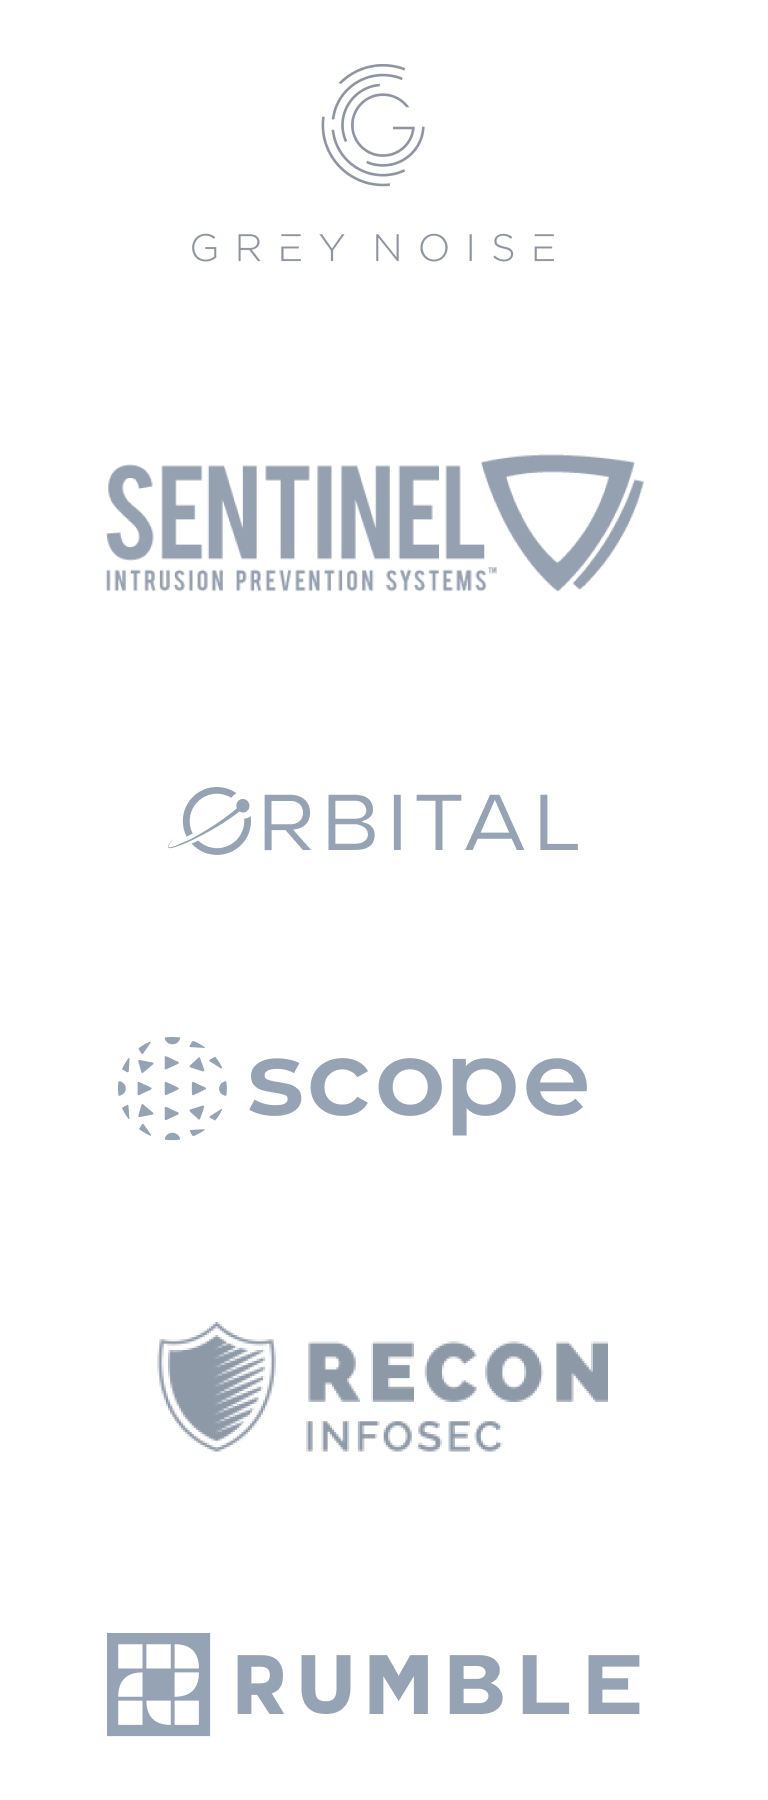 Our clients include Grey Noise, Sentinel Intrusion Prevention Systems, Orbital, Scope, Recon Infosec, and Rumble.